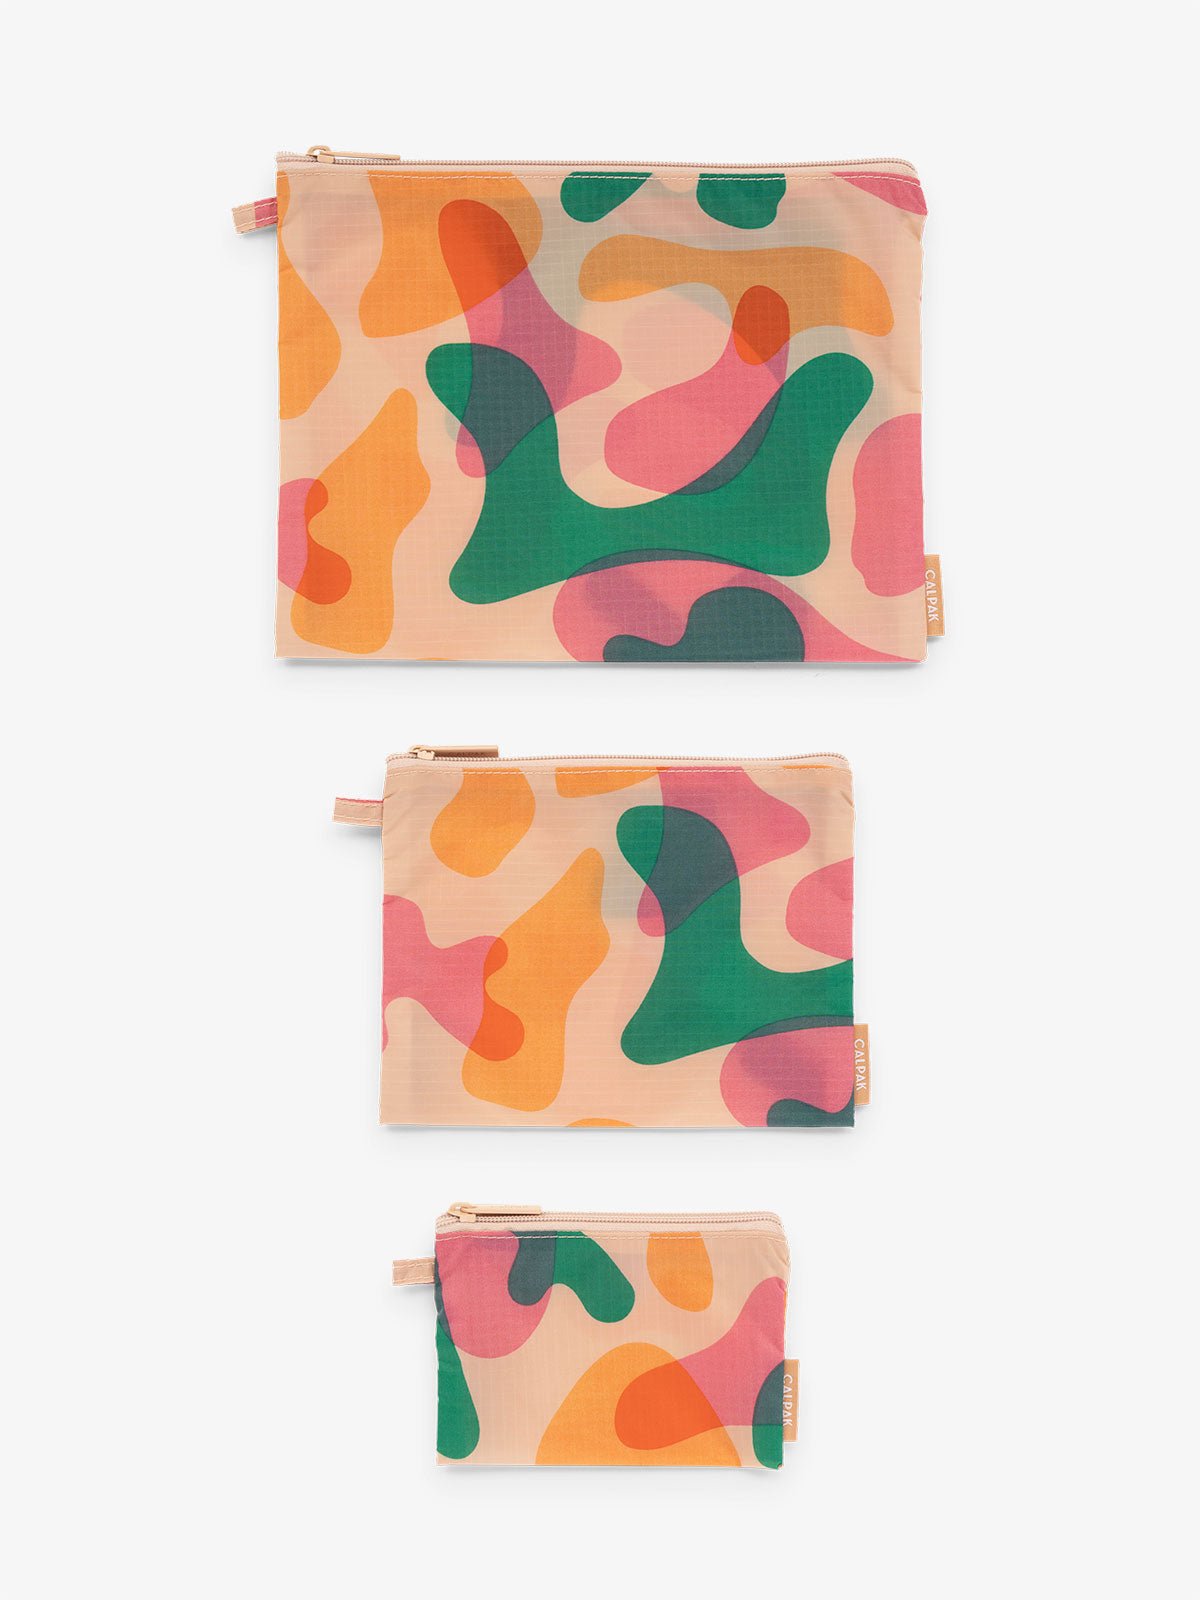 CALPAK Compakt water resistant zippered pouch set for organization in pink and green abstract print